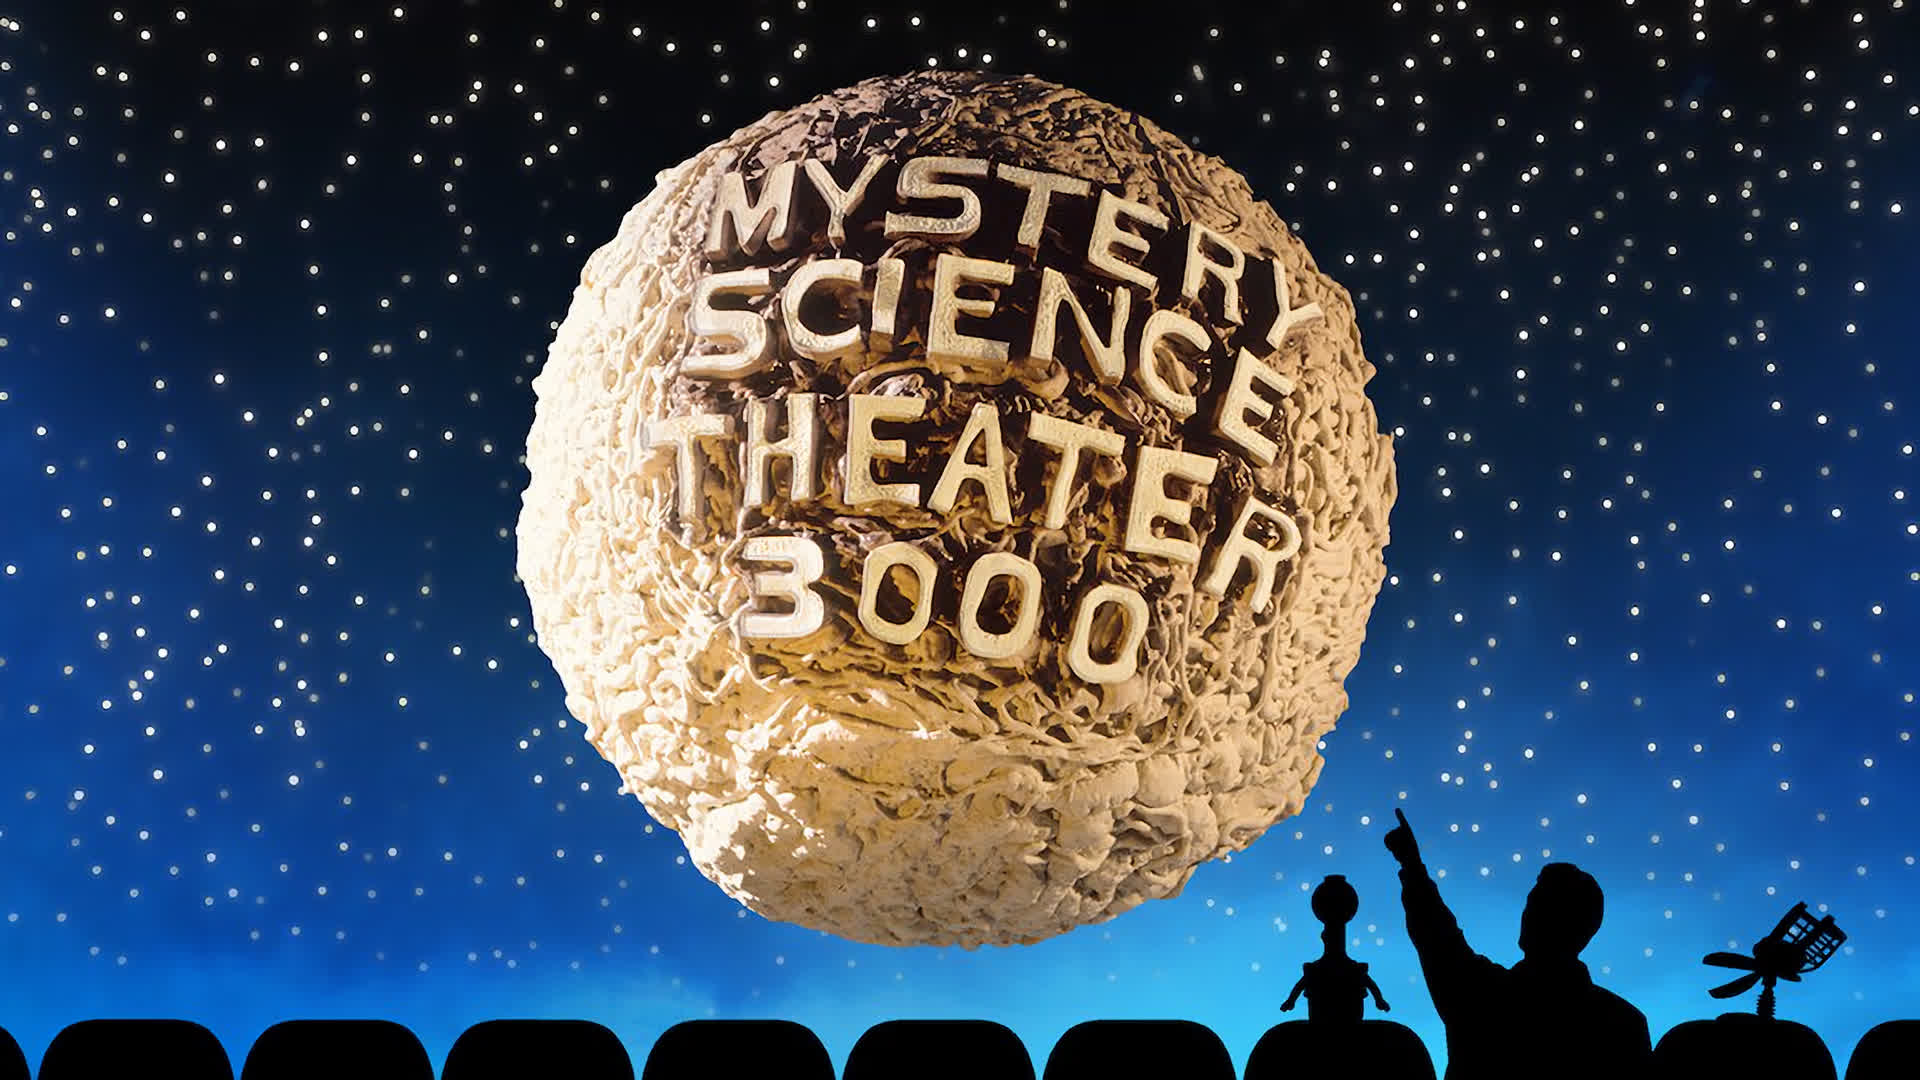 Mystery Science Theater 3000 returns to Kickstarter to fund the show's future